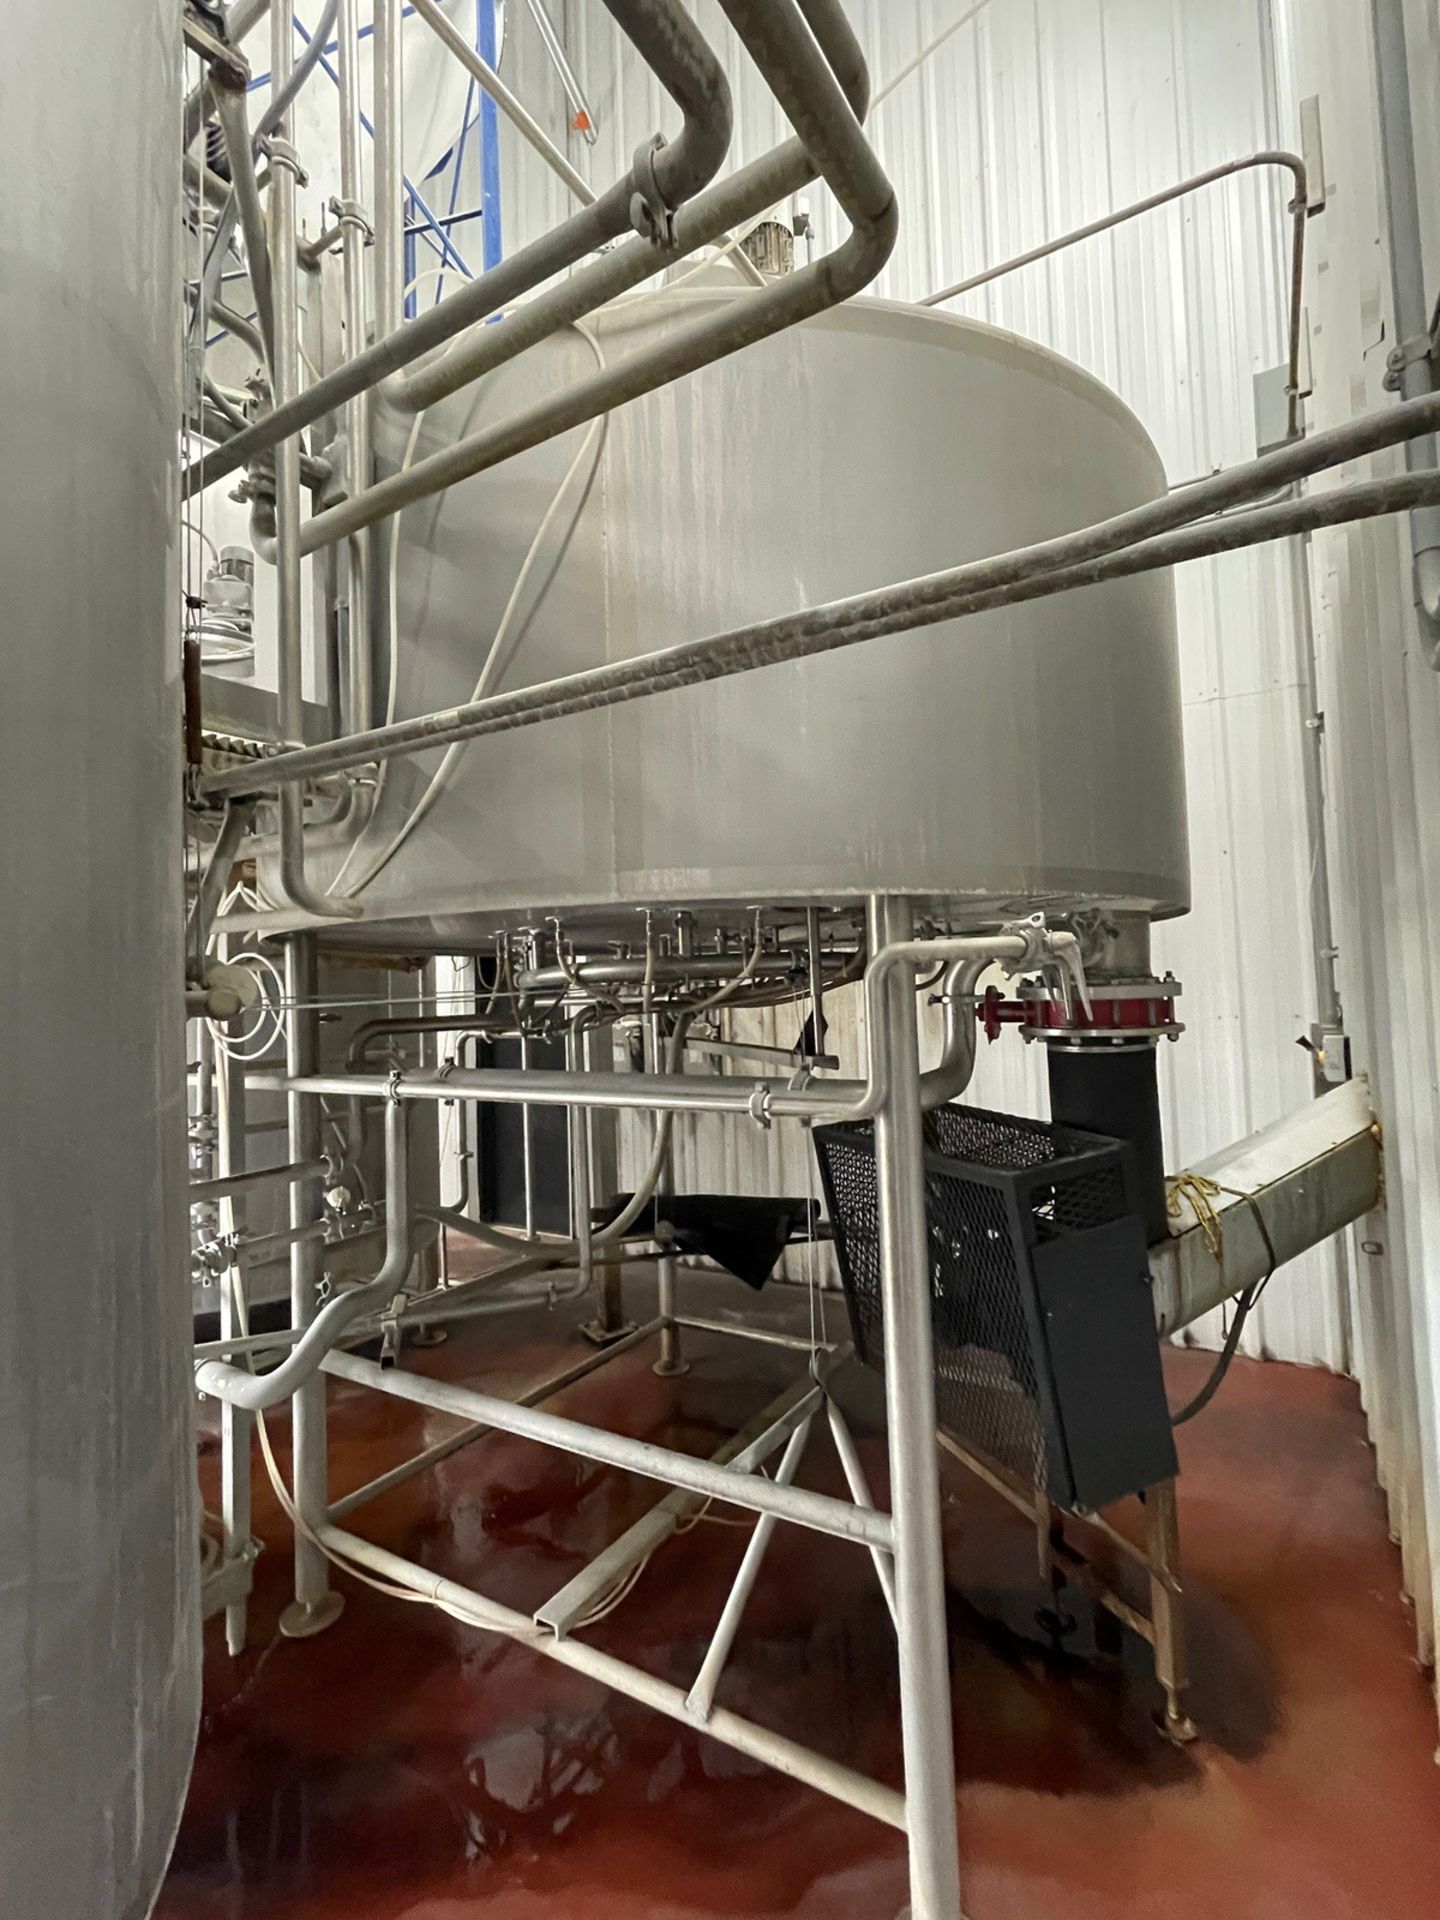 2012 Sprinkman 30 BBL 5-Vessel Brewhouse, with Grain Mash Tun (33 BBLS, Approx. 6.5 | Rig Fee $16000 - Image 48 of 108